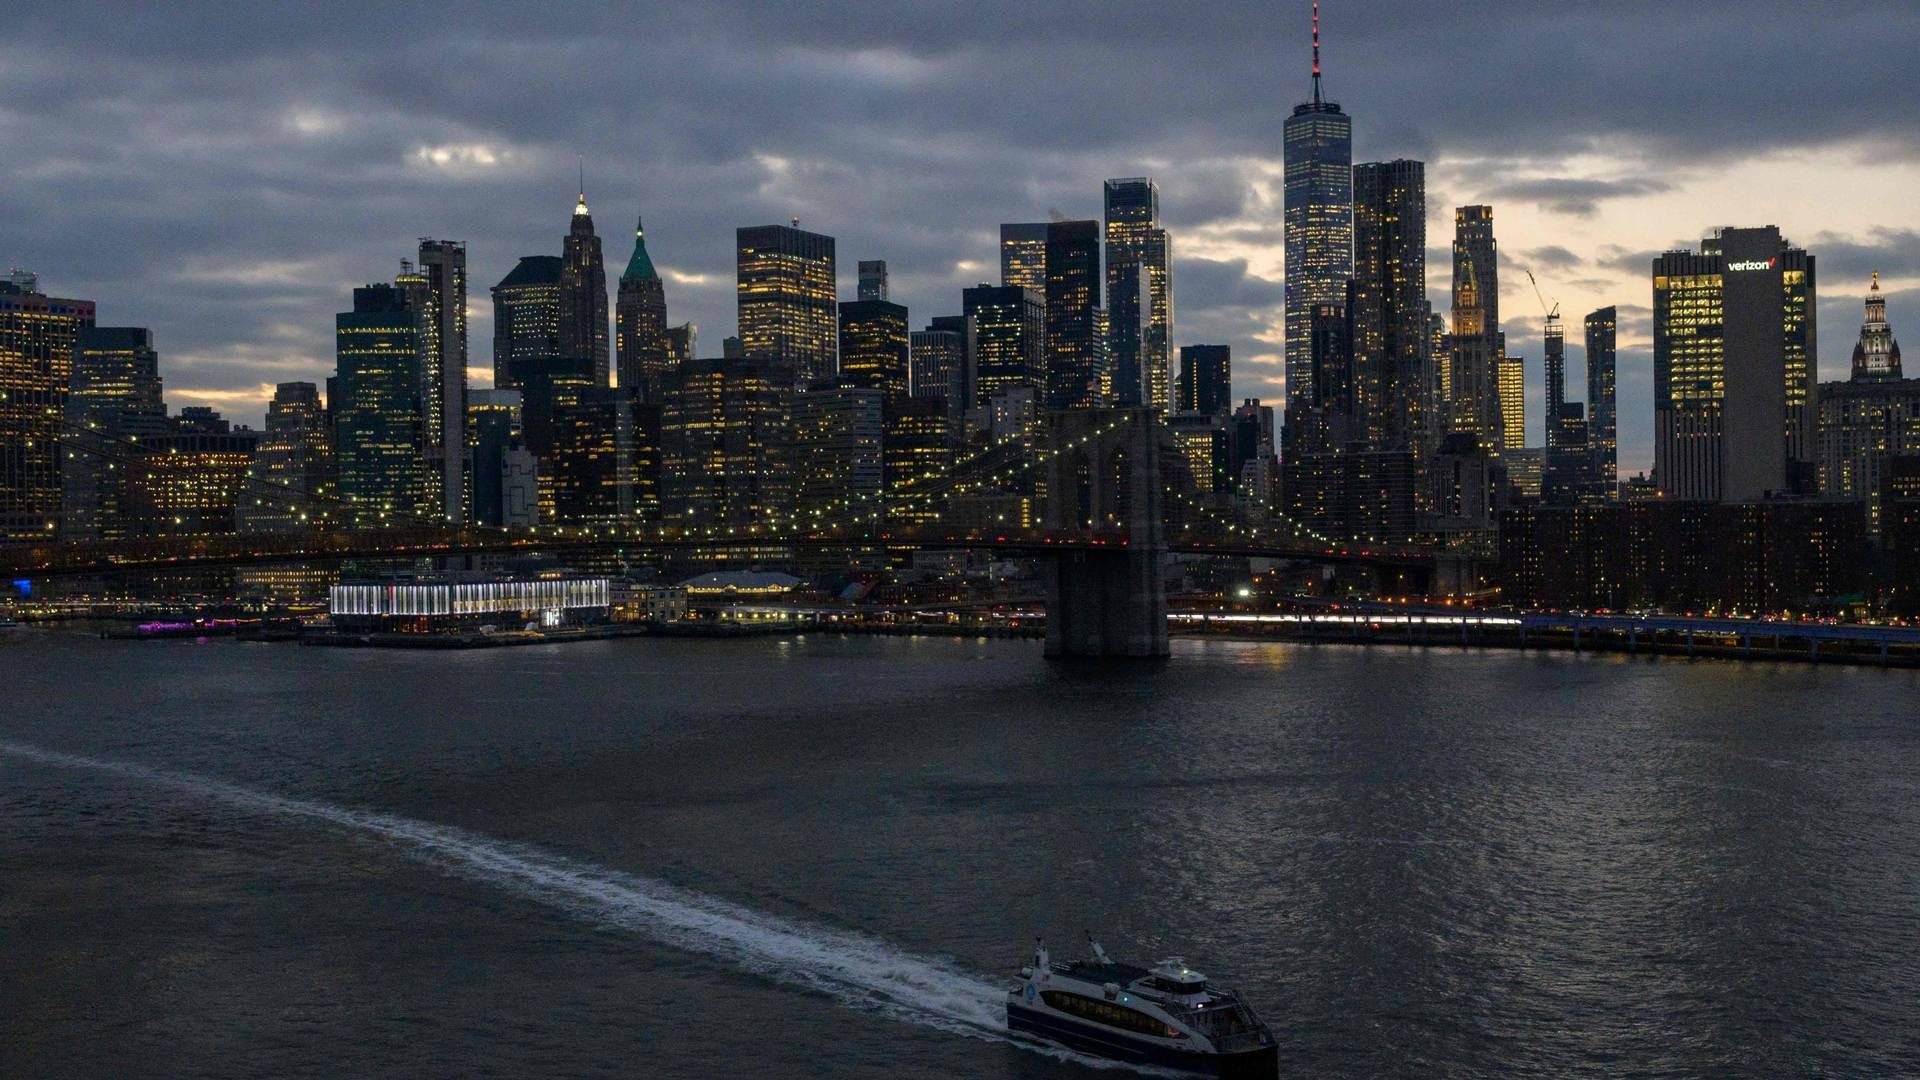 The skyline of lower Manhattan is seen past a ferry on the East River in New York City on February 06, 2023. | Photo: Angela Weiss/AFP/Ritzau Scanpix